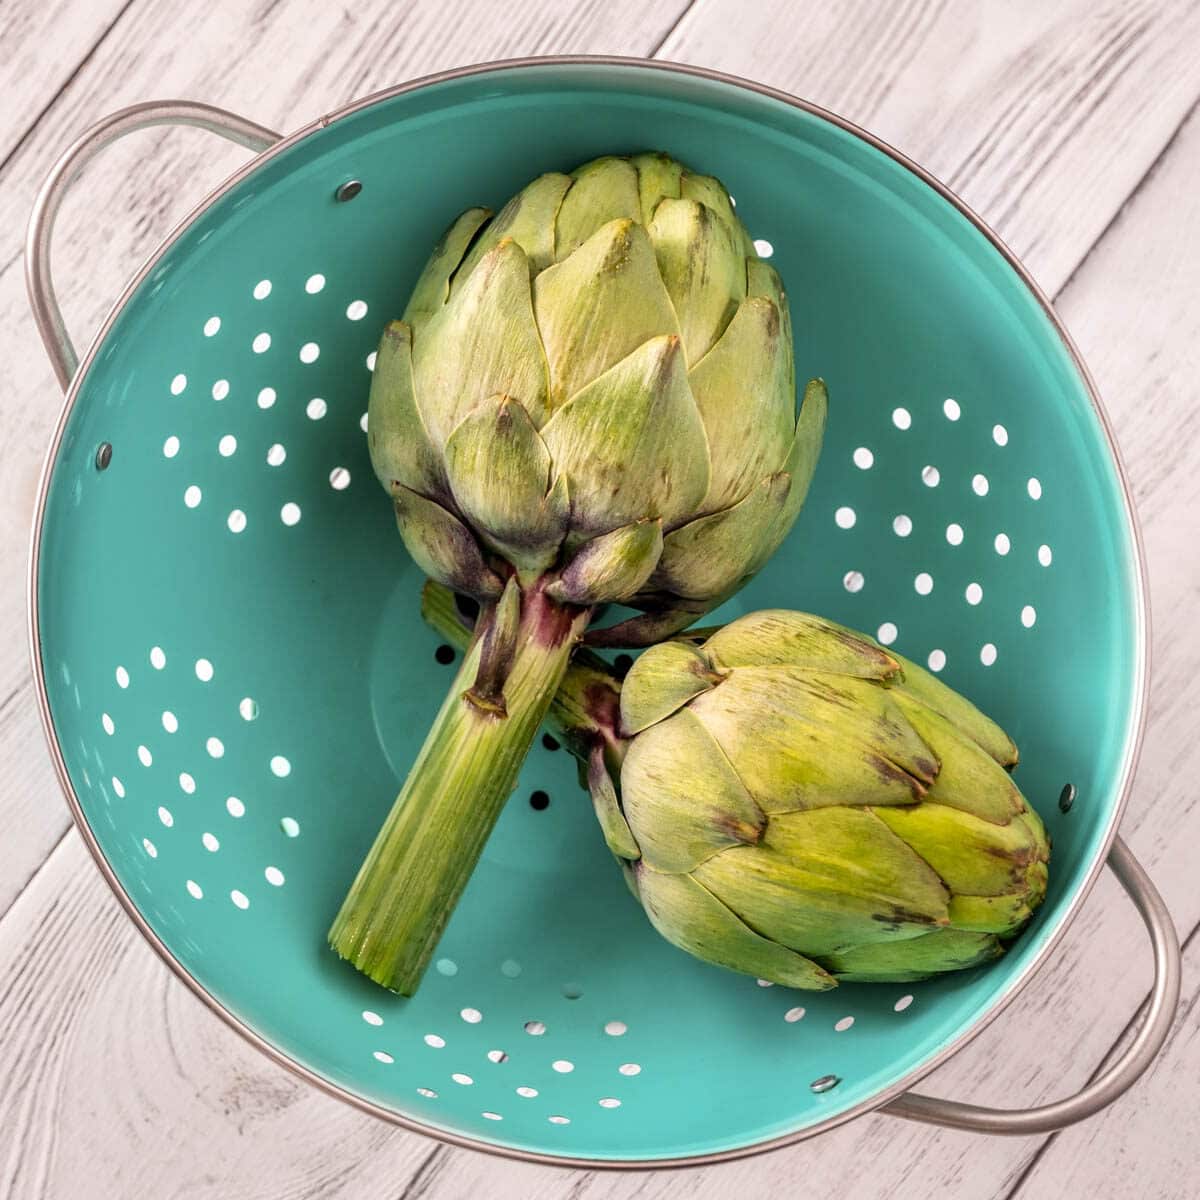 2 whole fresh artichokes in a teal colander.